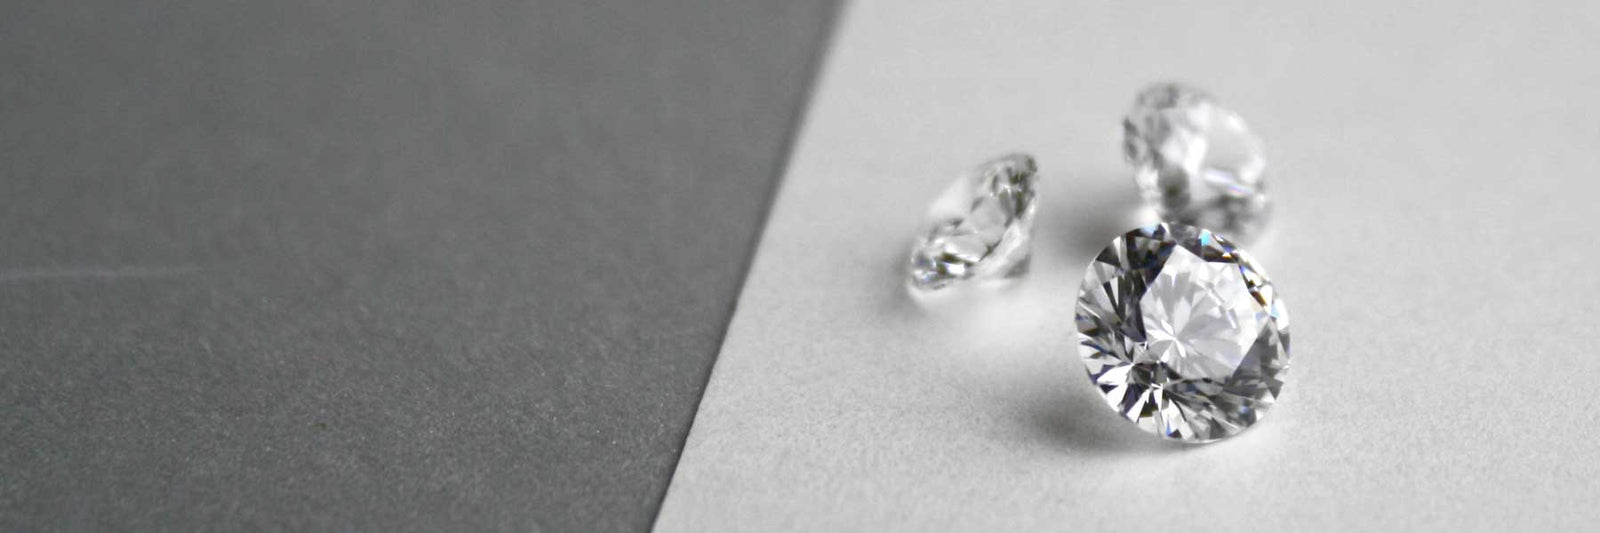 affordable lab grown diamonds and engagement rings at Quorri